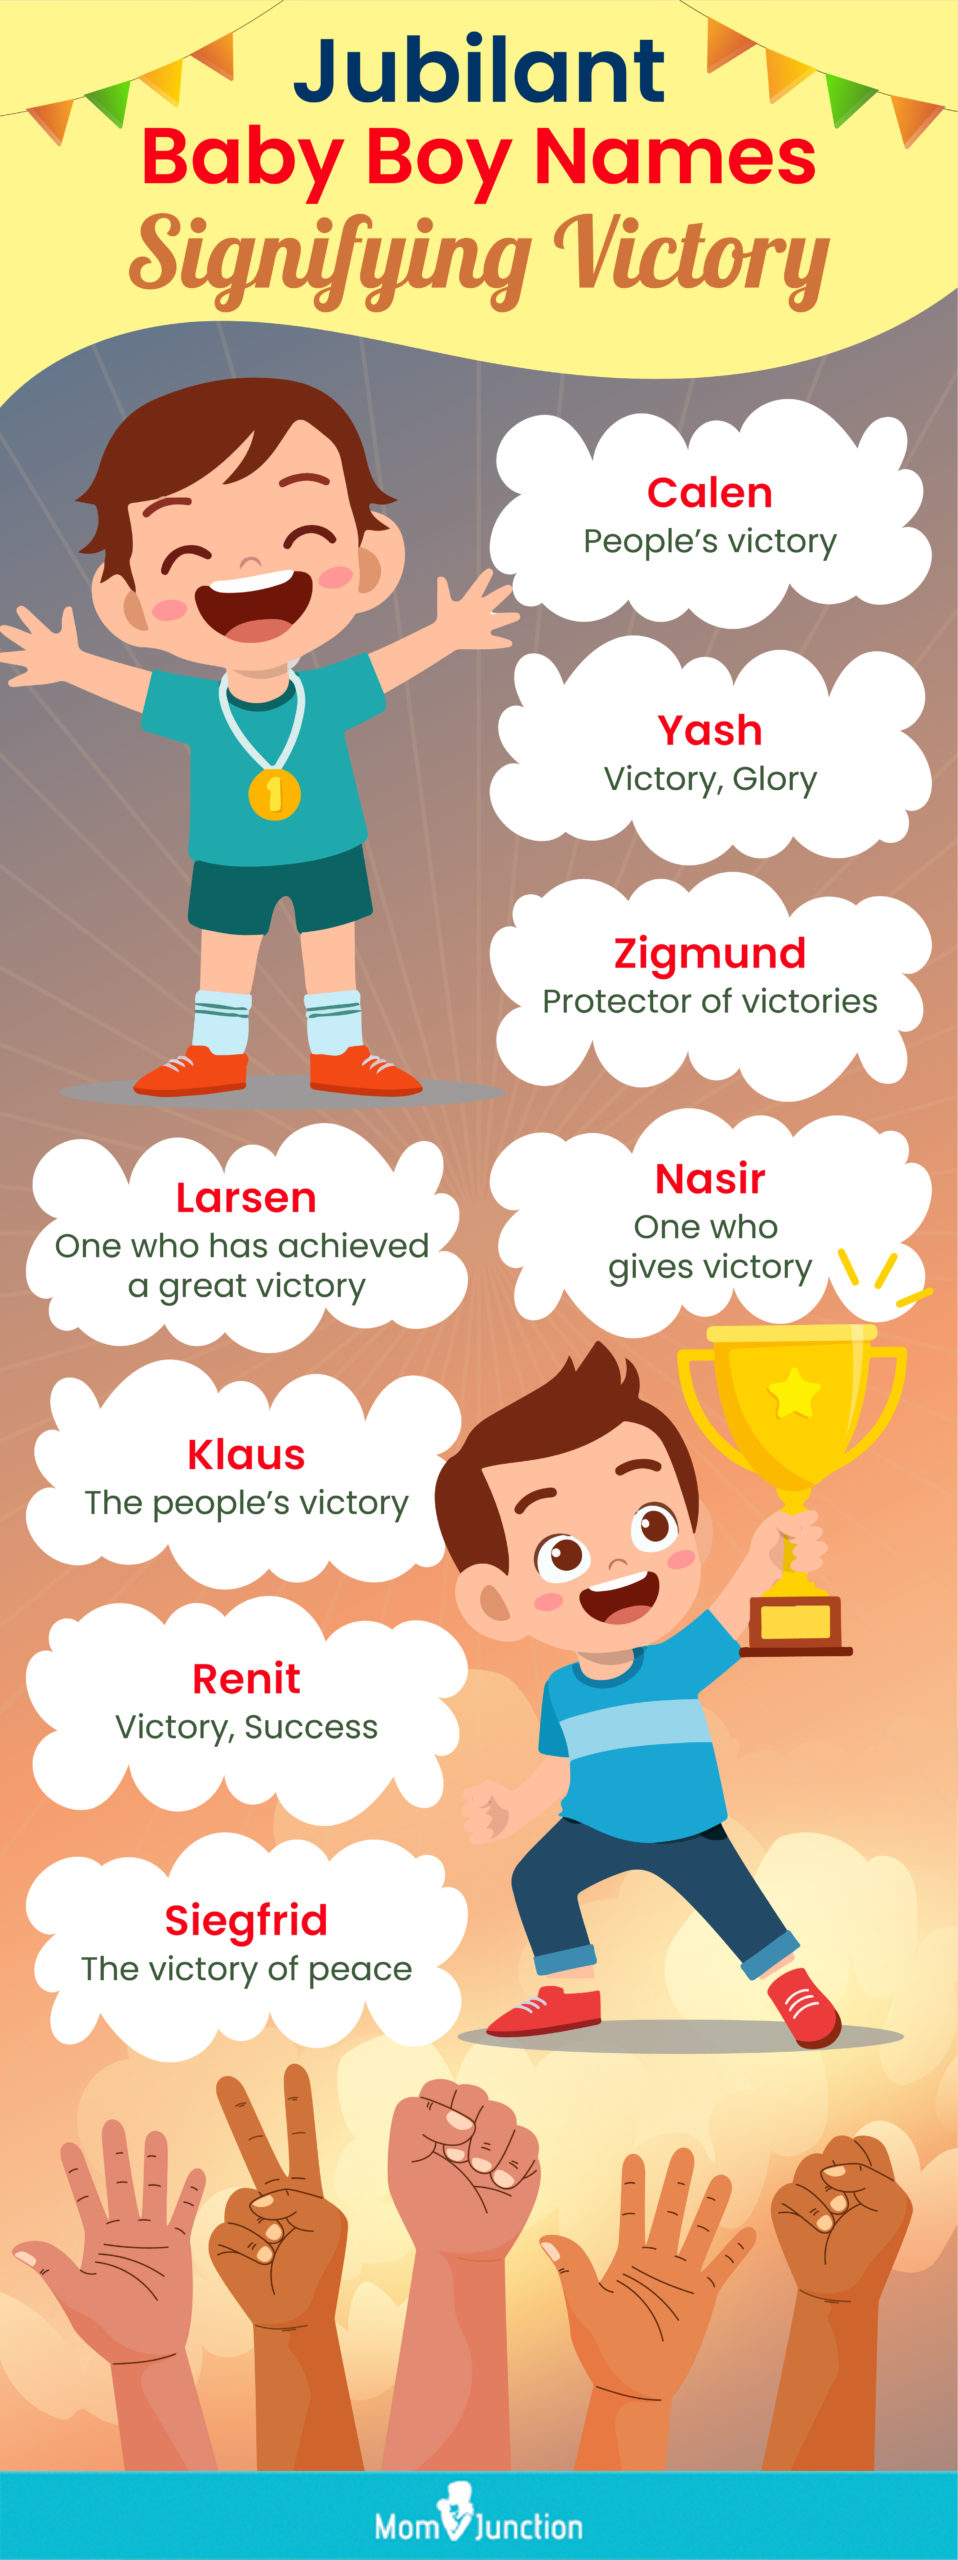 jubilant baby boy signifying victory (infographic)